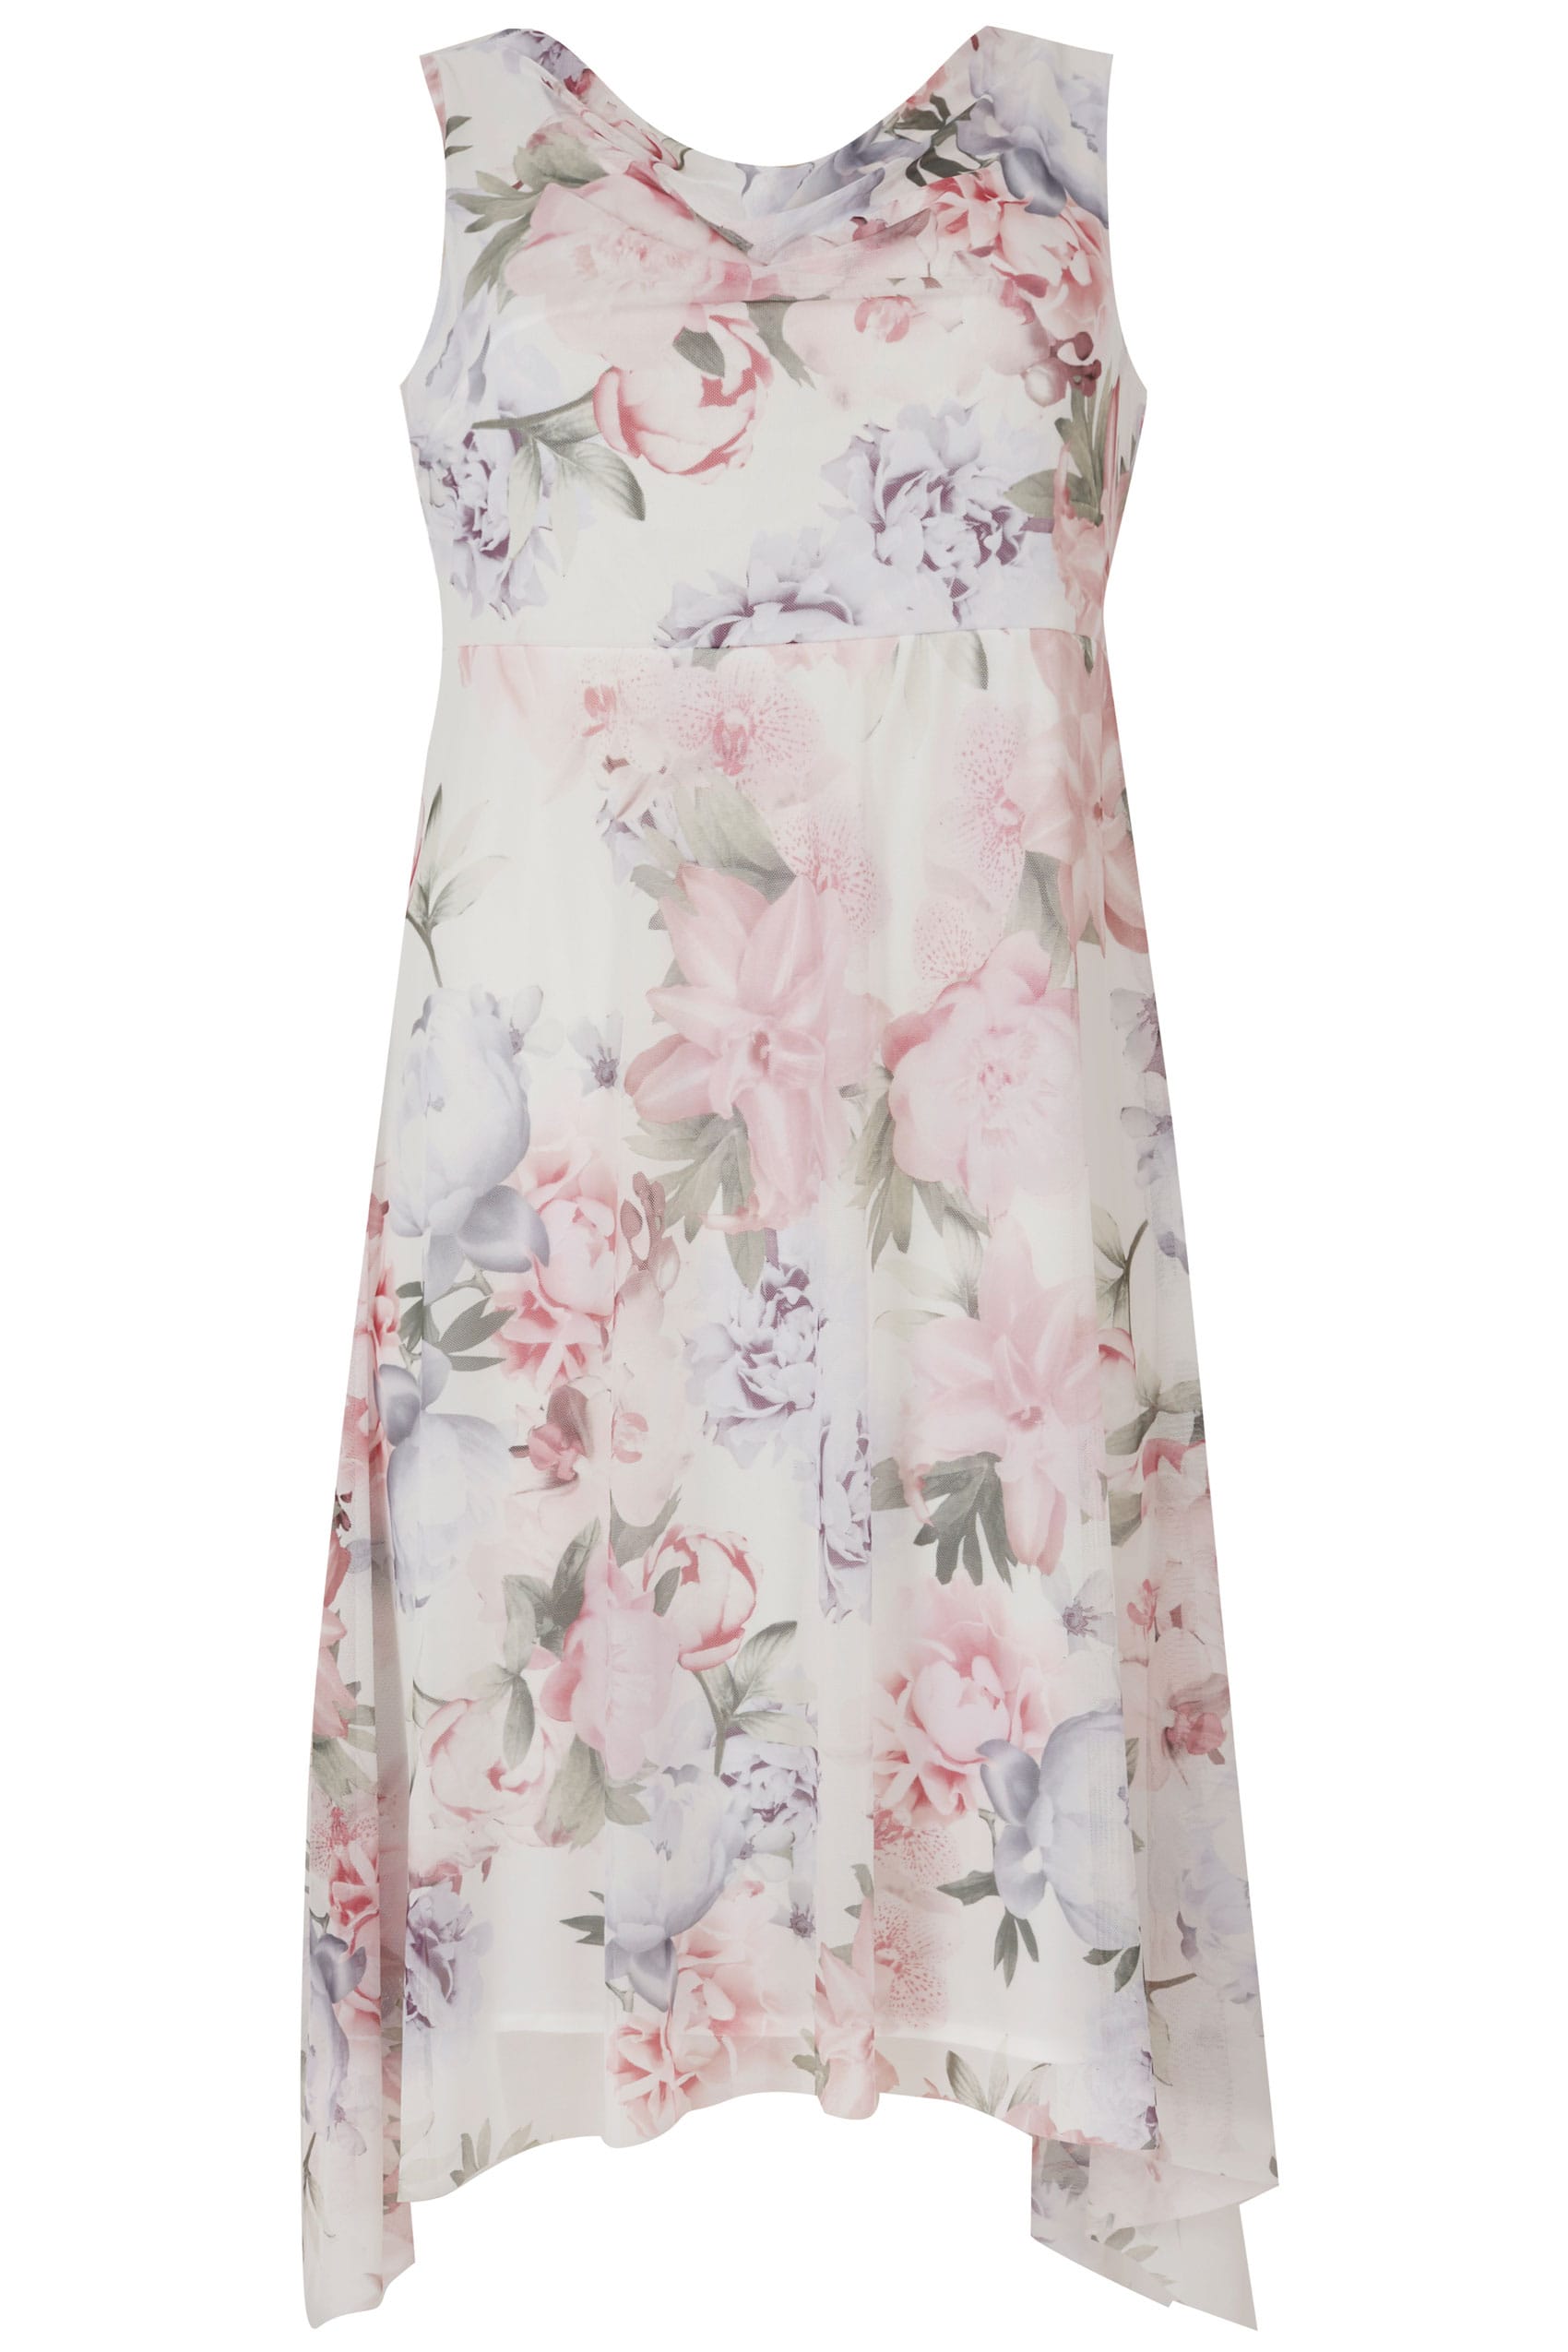 YOURS LONDON Ivory & Pastel Floral Midi Dress With Cowl Neck, Plus size ...